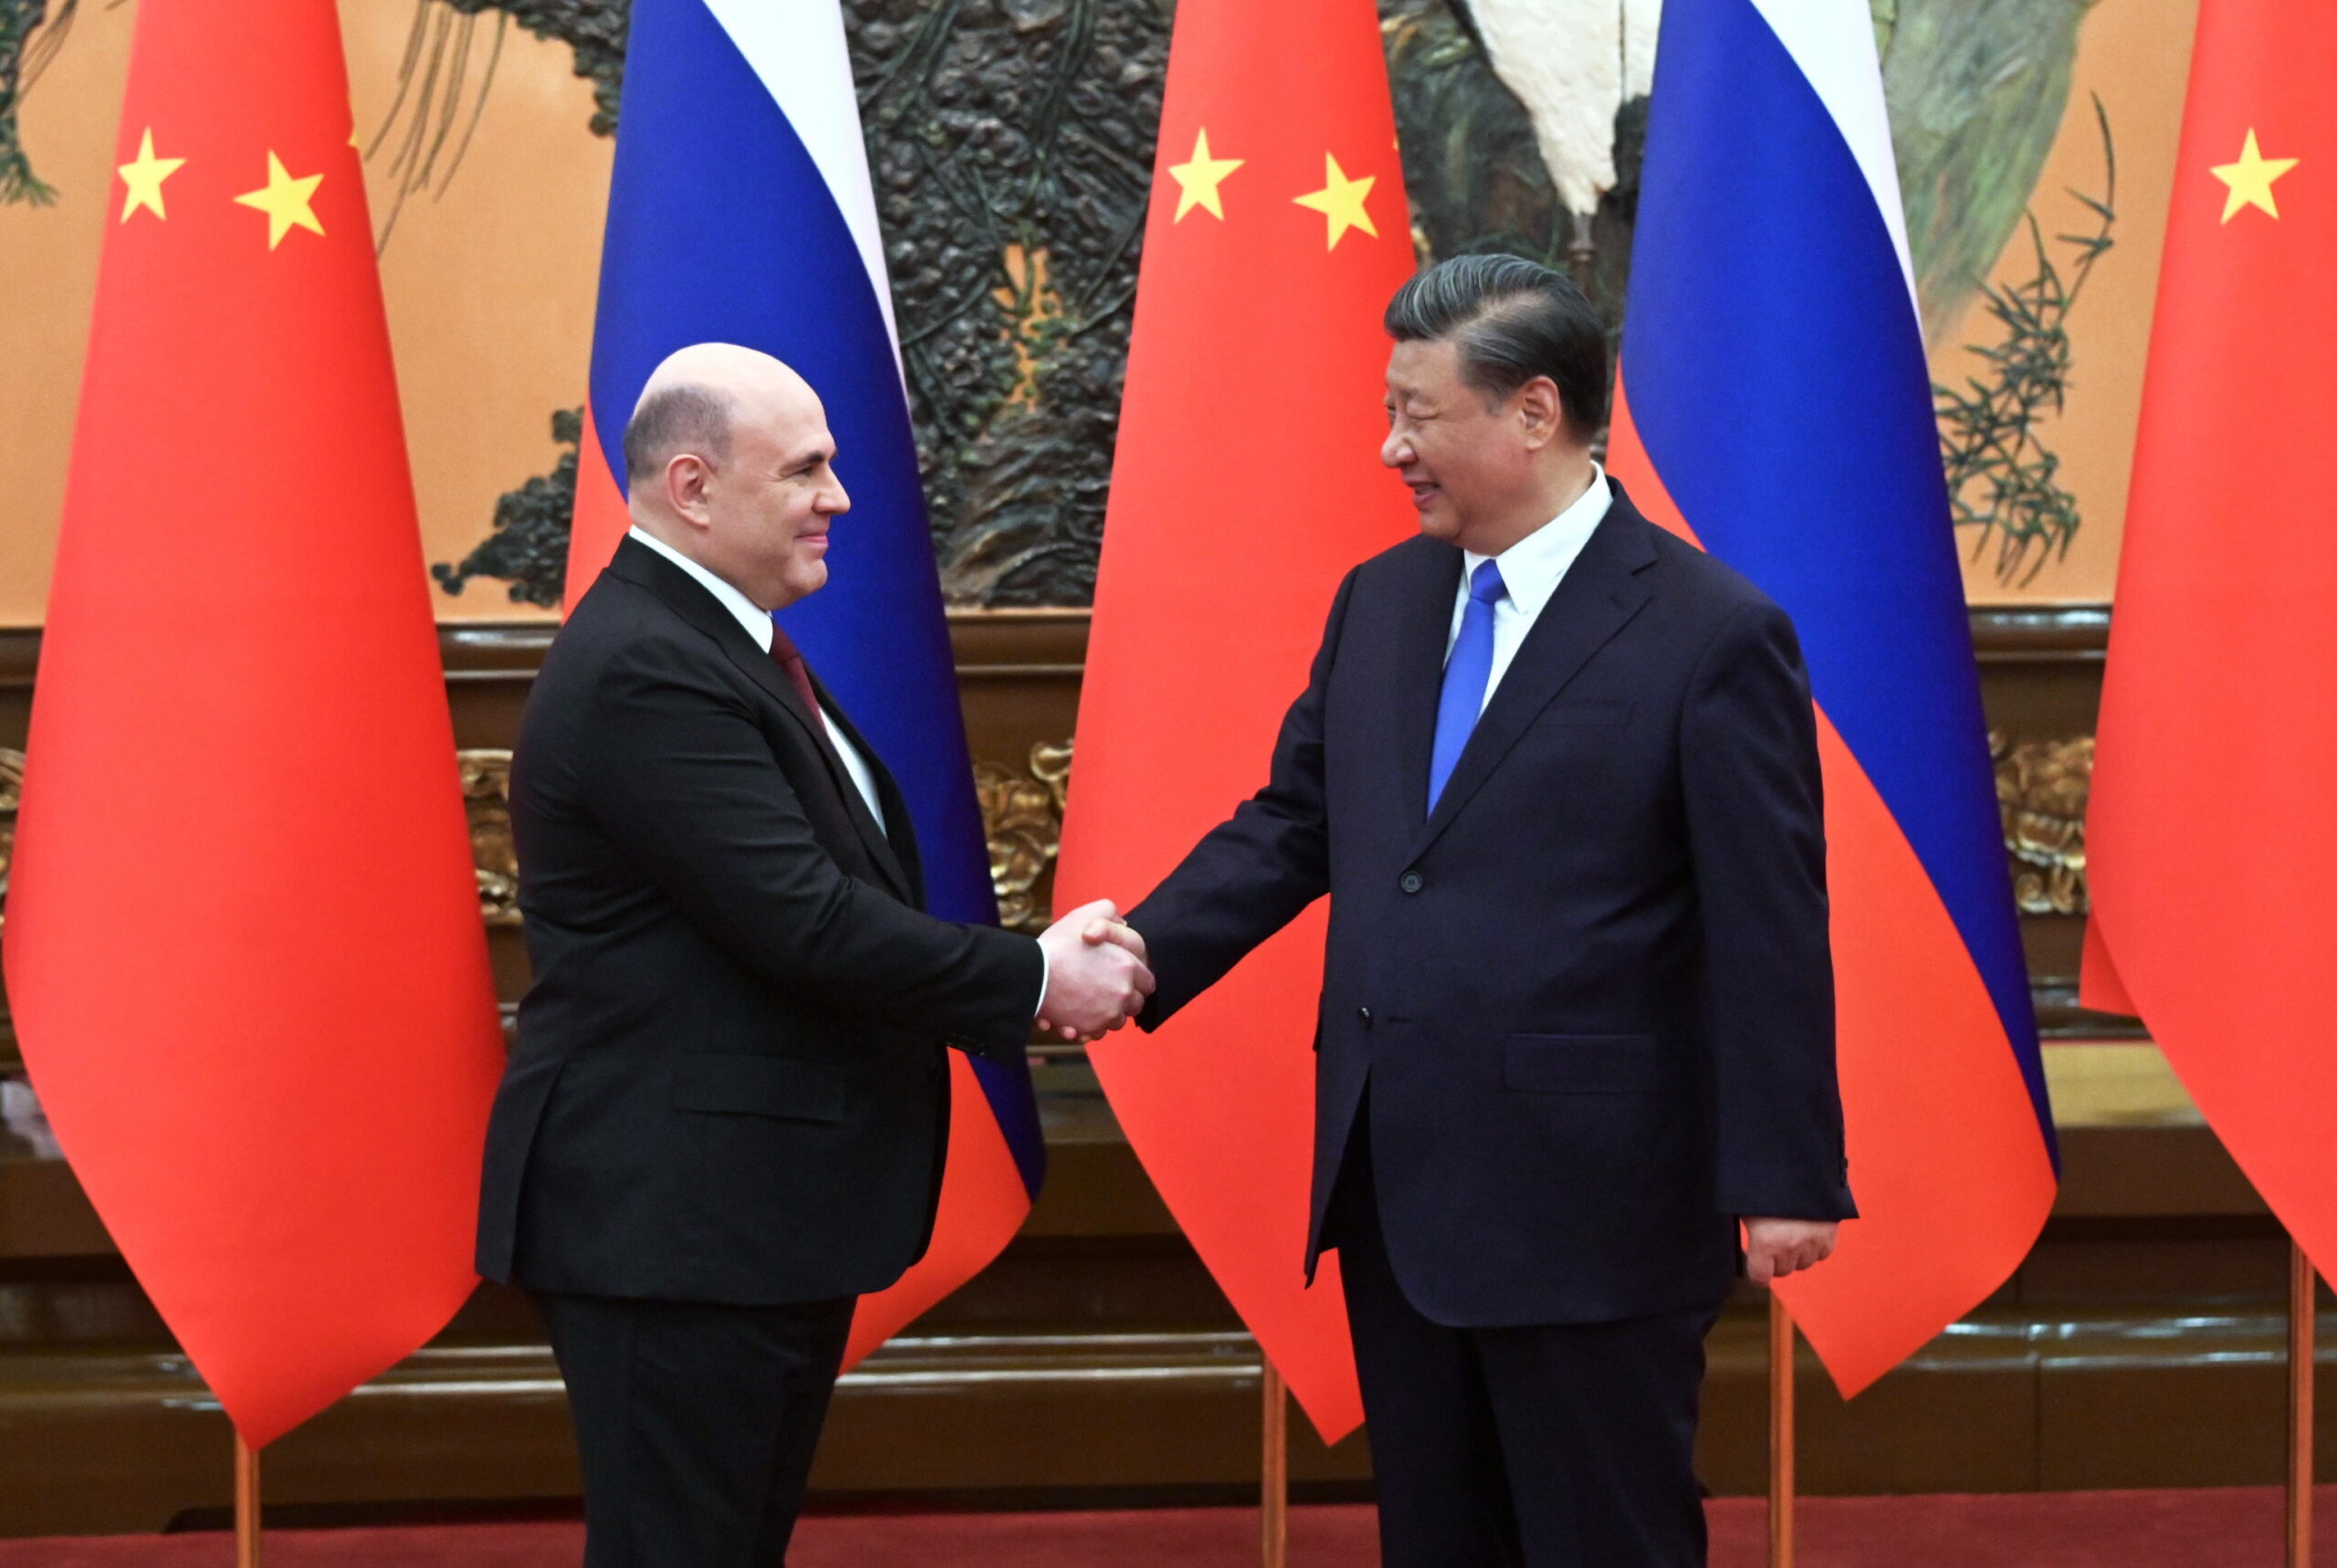 China and Xi Jinping confirm support for Russia on core interests